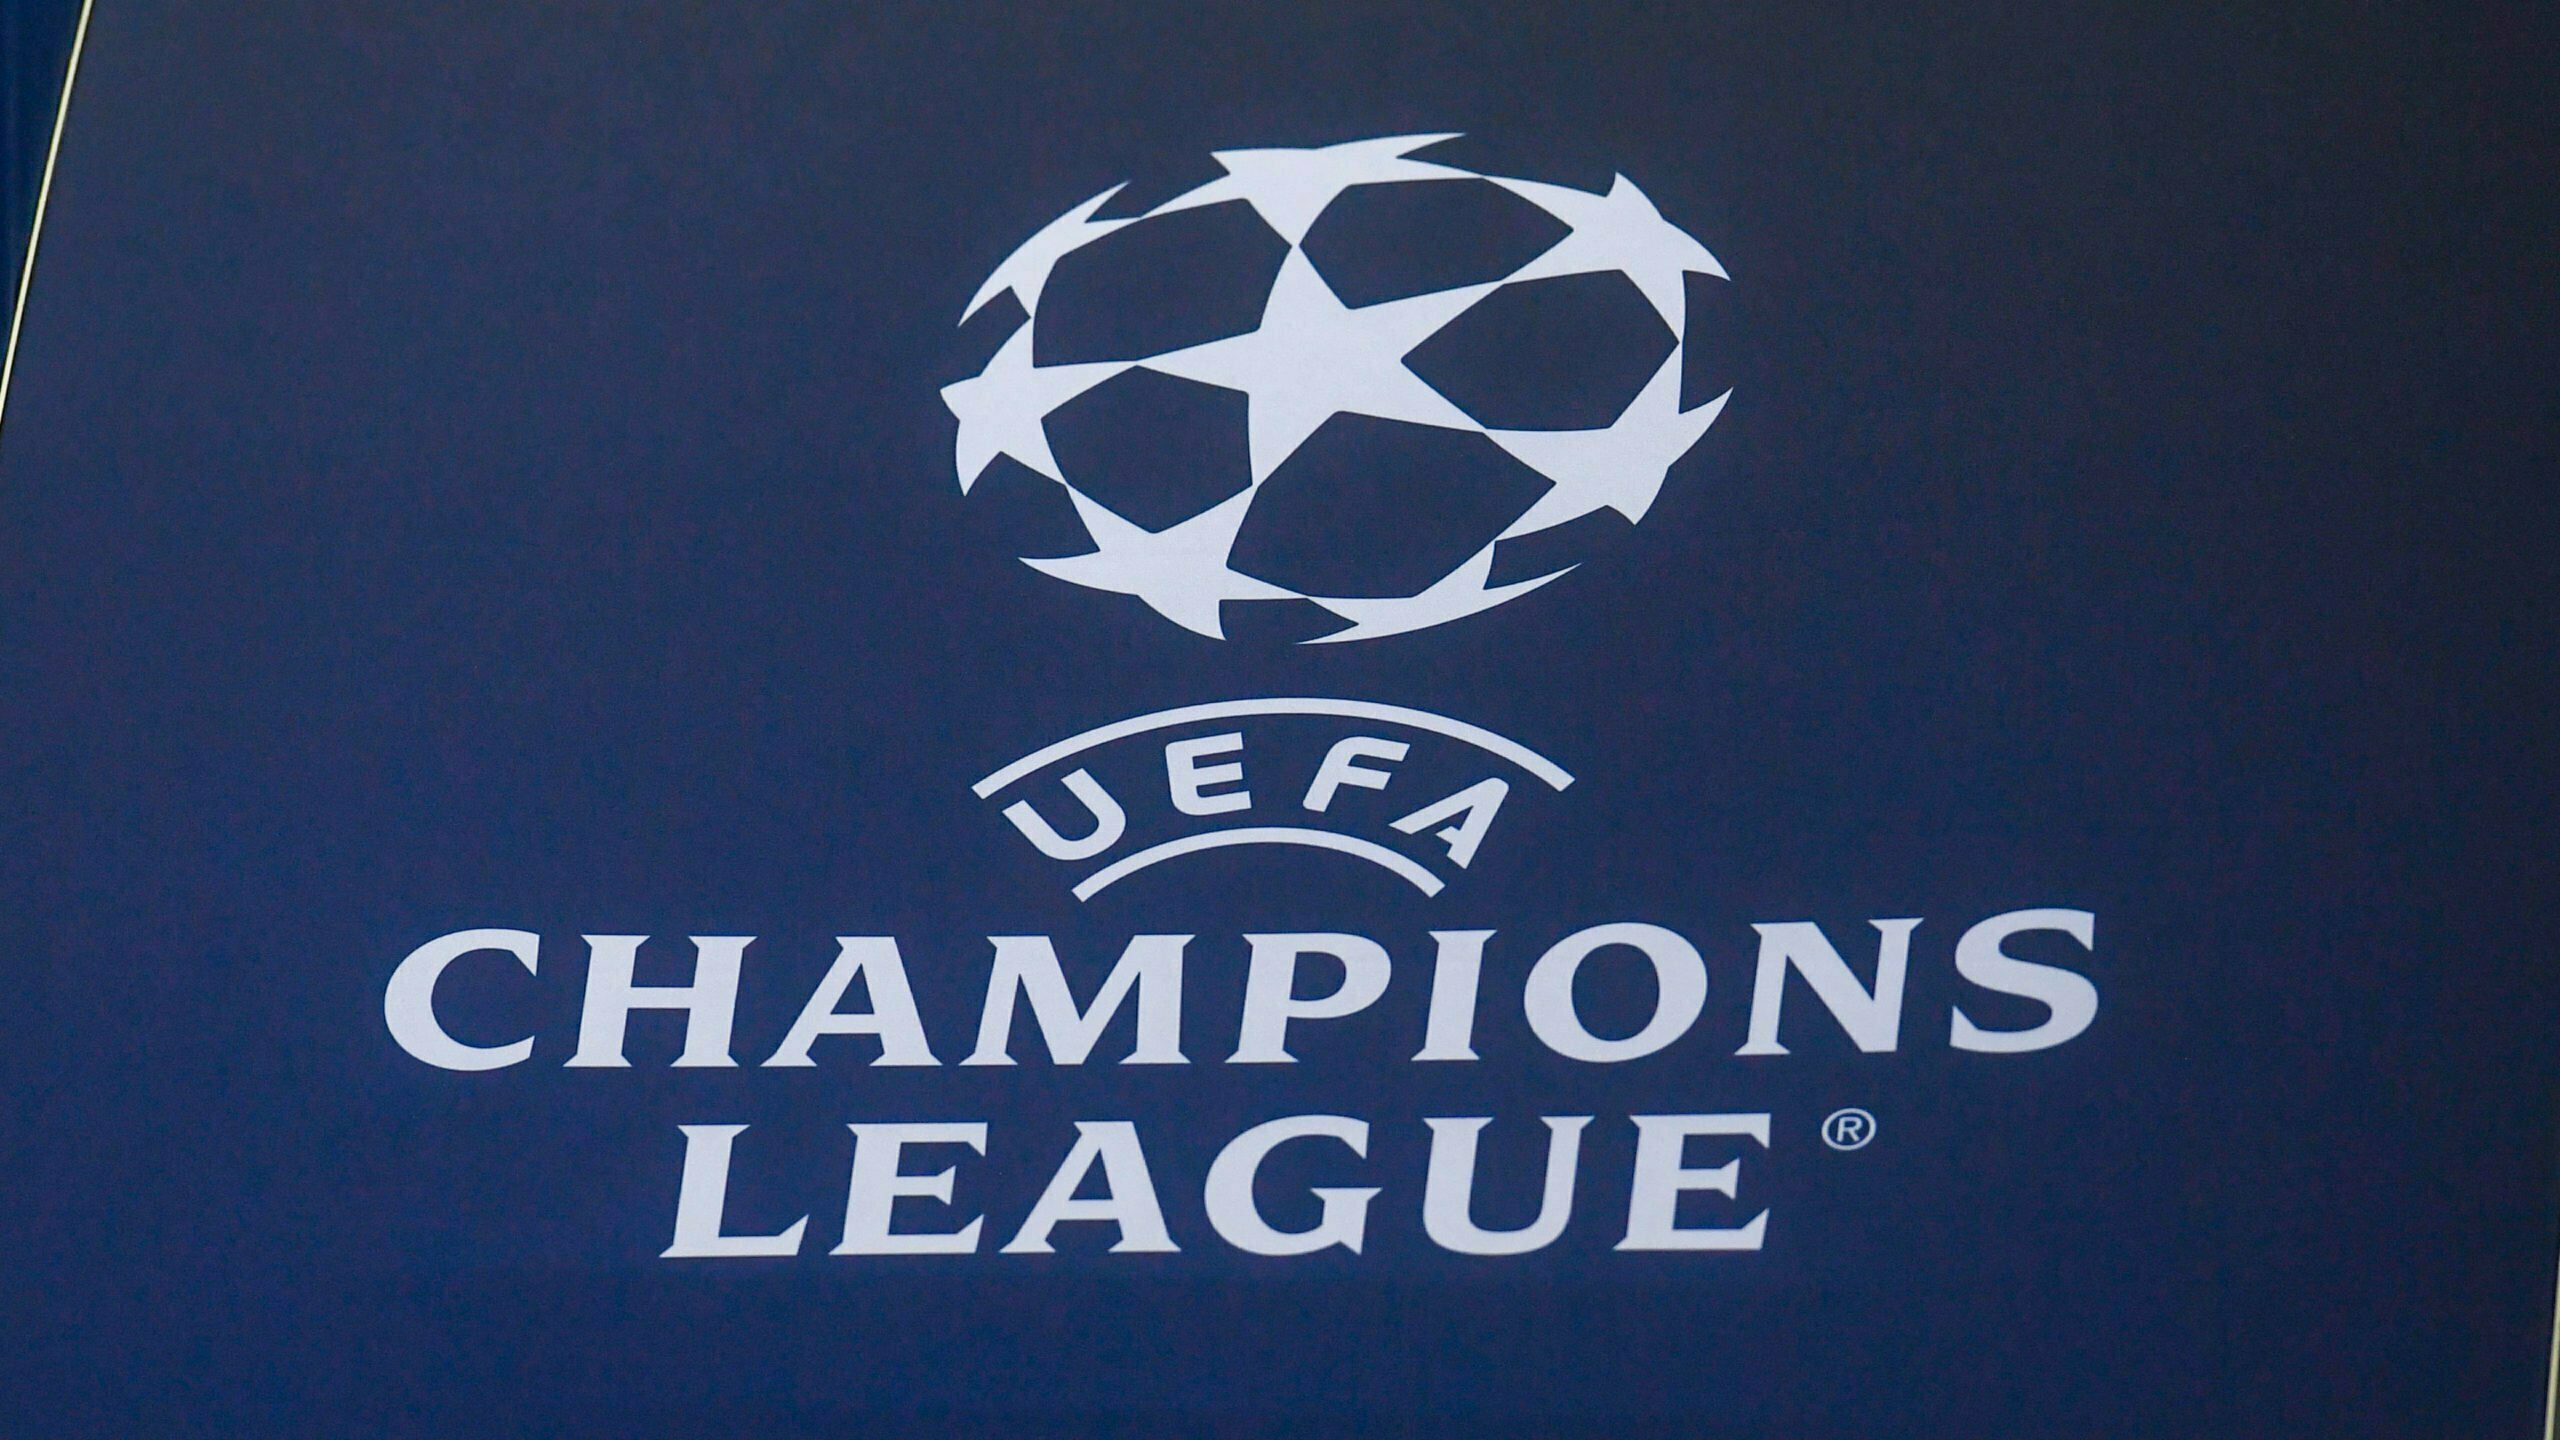 Celtic earn an estimated €9 million more than Rangers from Champions League campaign